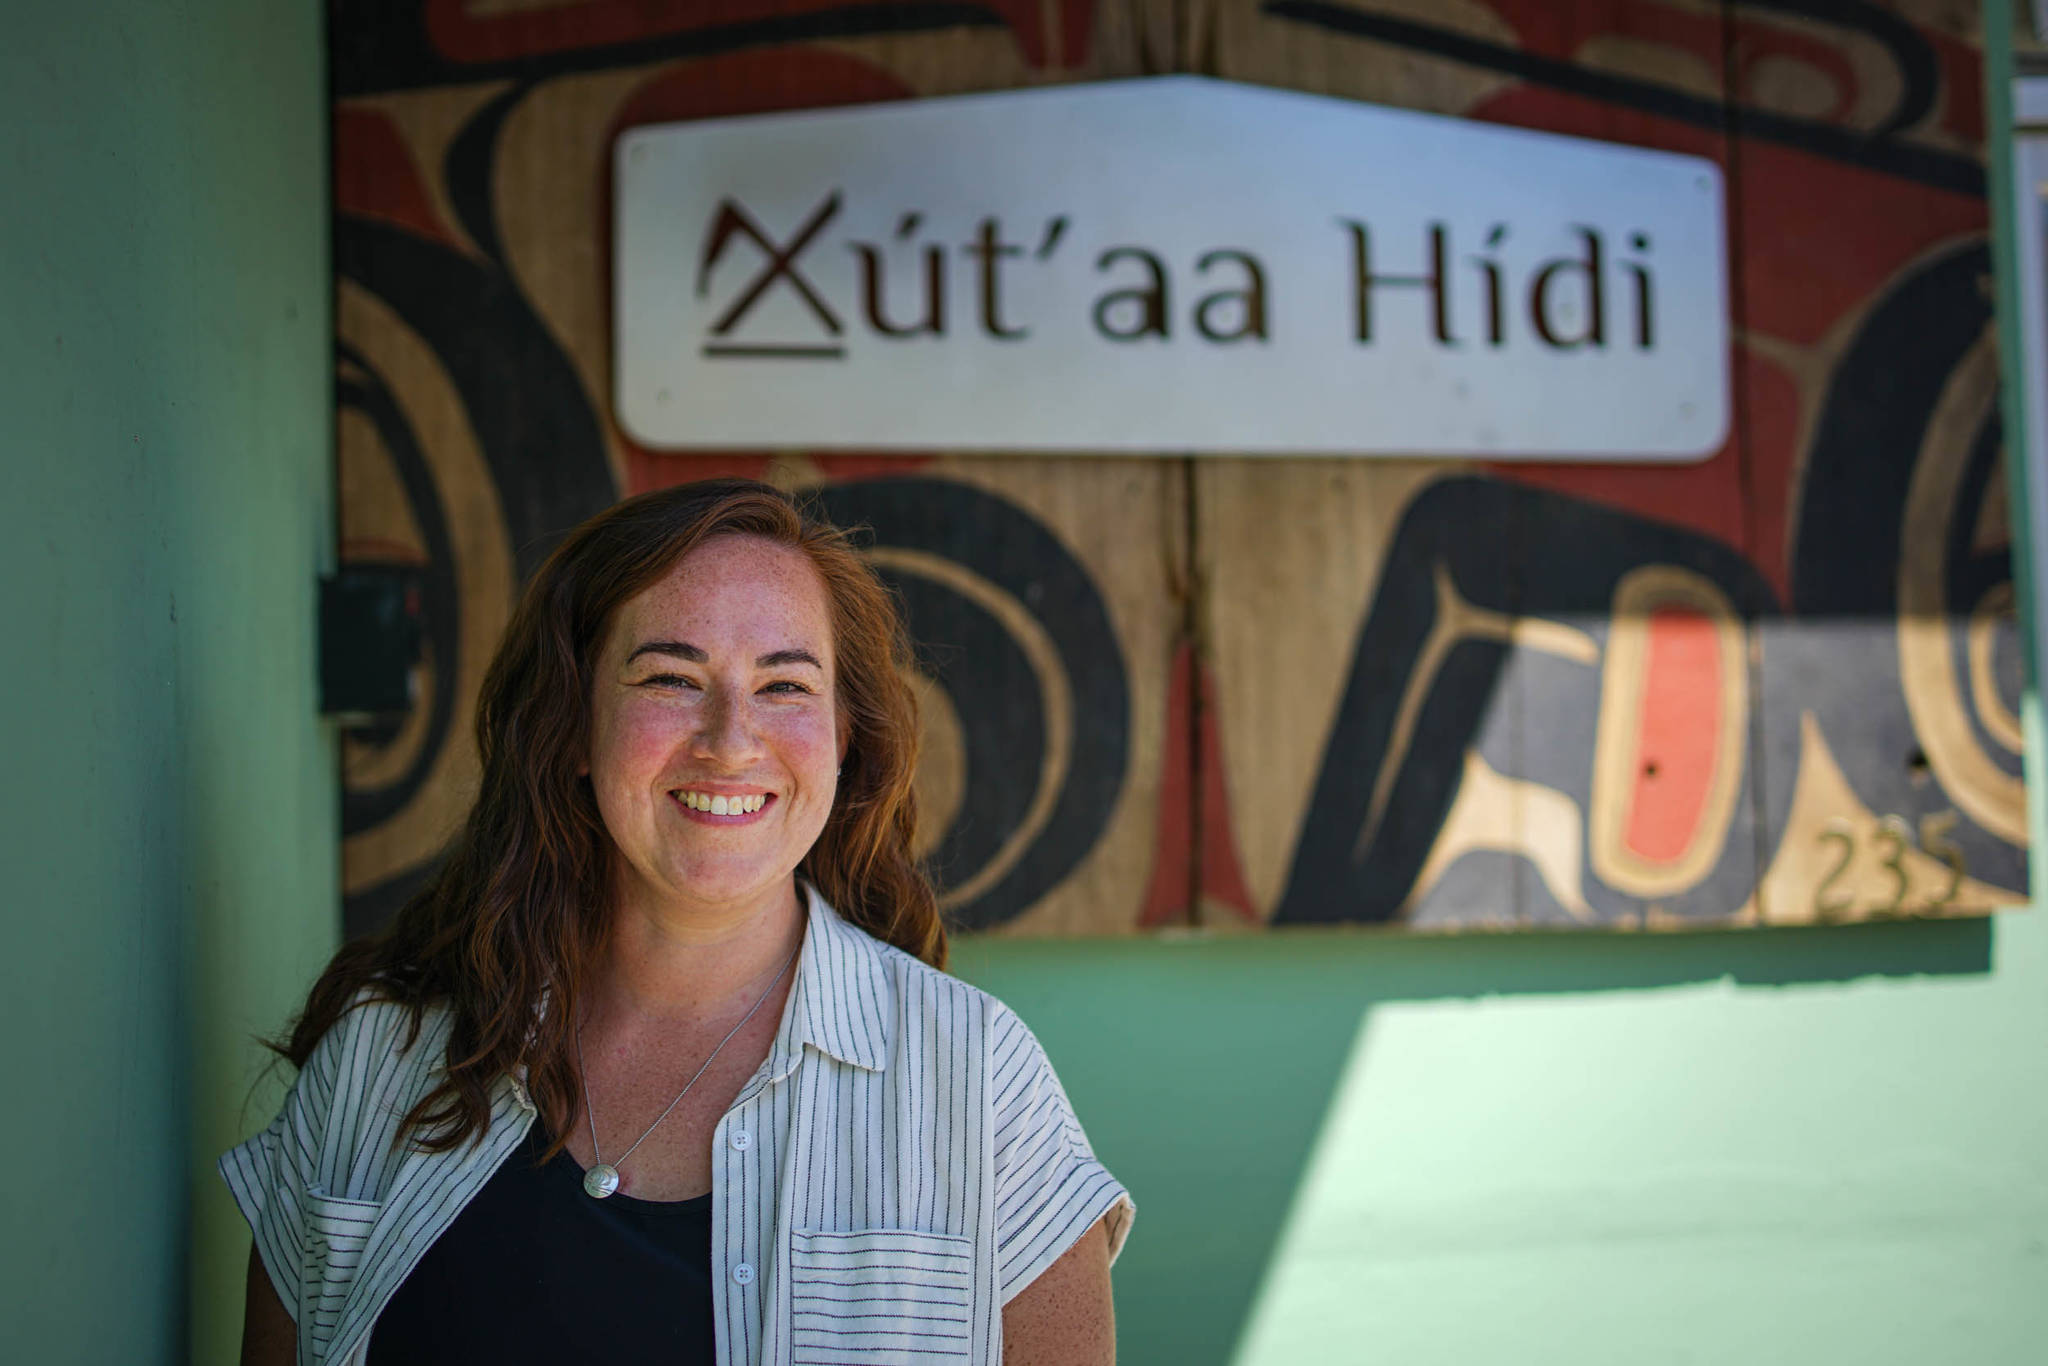 Alana Peterson is a business owner and the Executive Director of Spruce Root Inc., which supports entrepreneurs across the region and serves as the supporting organization for the SSP. Peterson is pictured in front of her latest business, Xút’aa Hídi Gallery she opened this summer with her brother Will Peterson. (Courtesy Photo / Bethany Sonsini Goodrich)